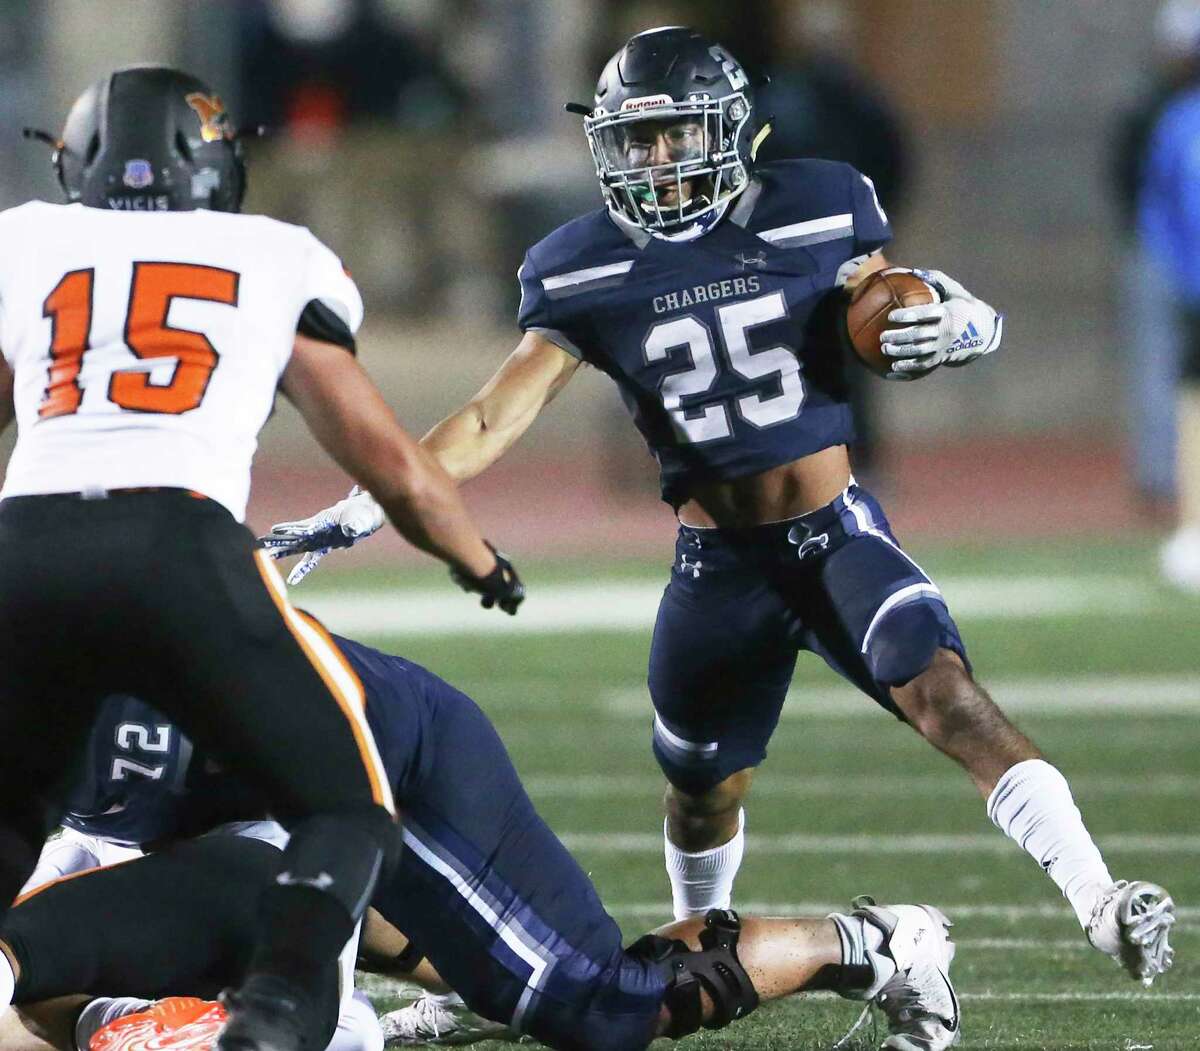 Chargers srunning back Alex Rodriguez steps out to make a move away from Seth Bullard as Boerne Champion hosts Medina Valley at Greyhound Stadium on Oct. 23, 2020.